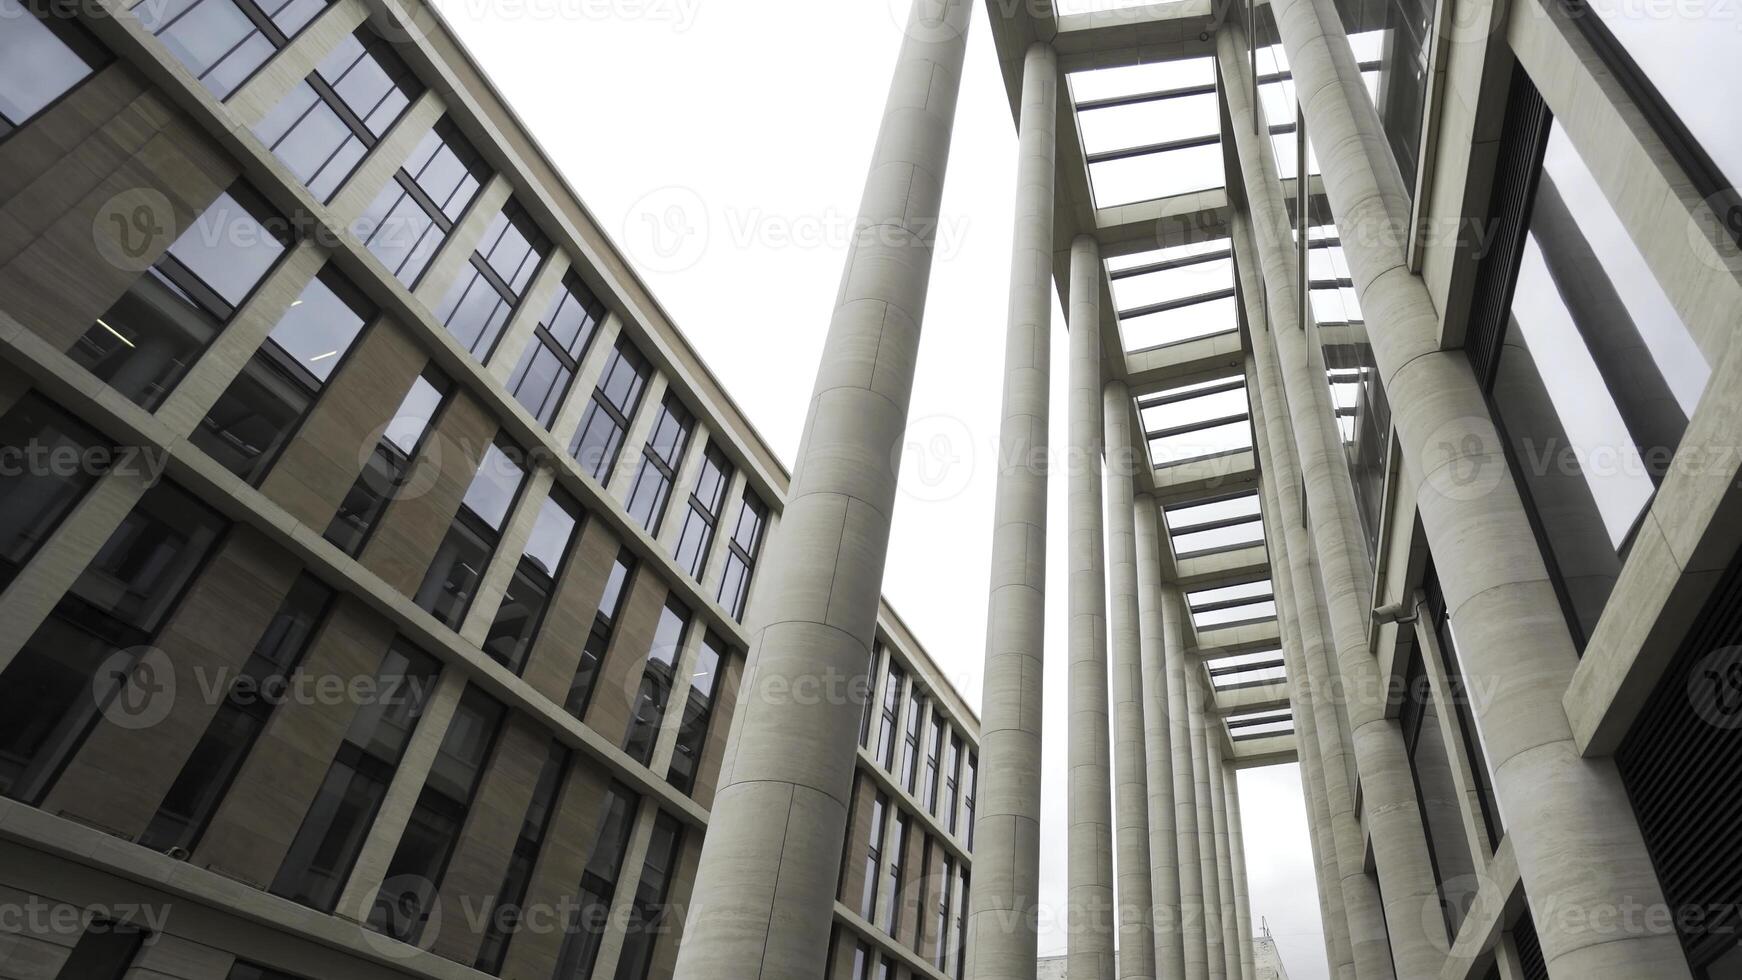 Facade of a building with marble columns. Action. Bottom view of a modern architectural complex, new building with light beige pillars and larg windows. photo